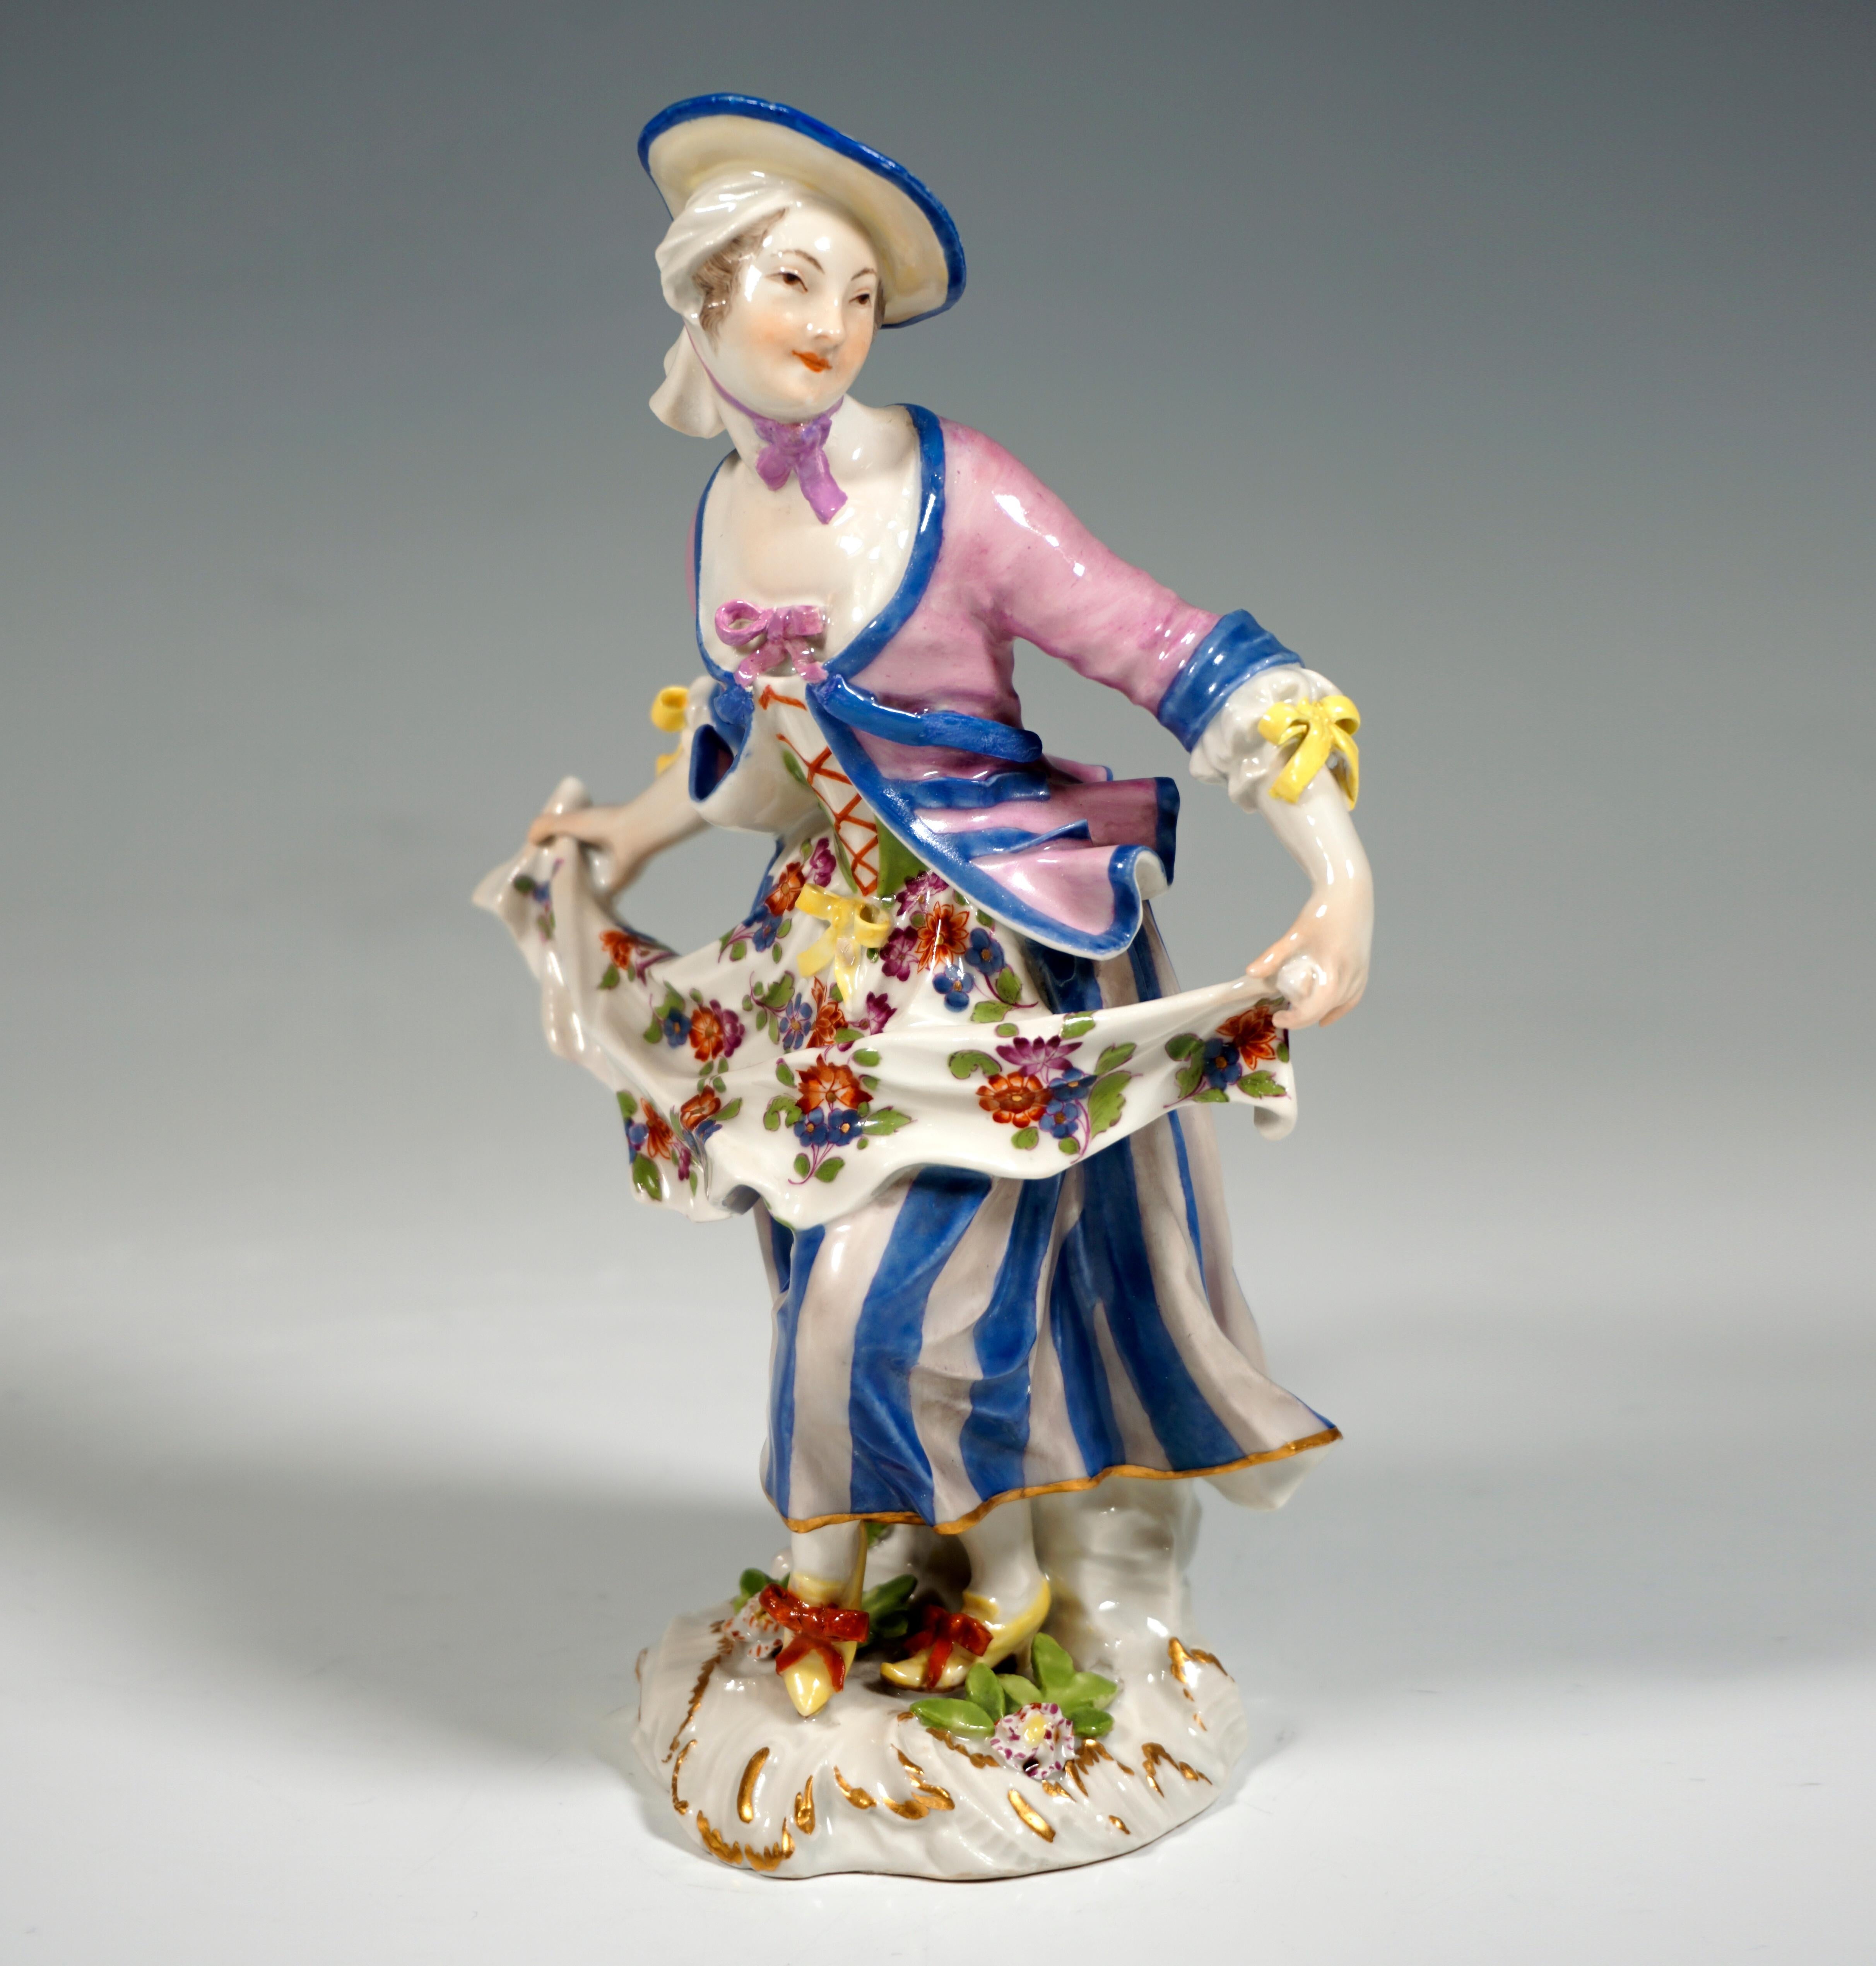 Hand-Crafted Pair of Very Early Meissen Figurines, Dance Couple, Germany, Around 1755